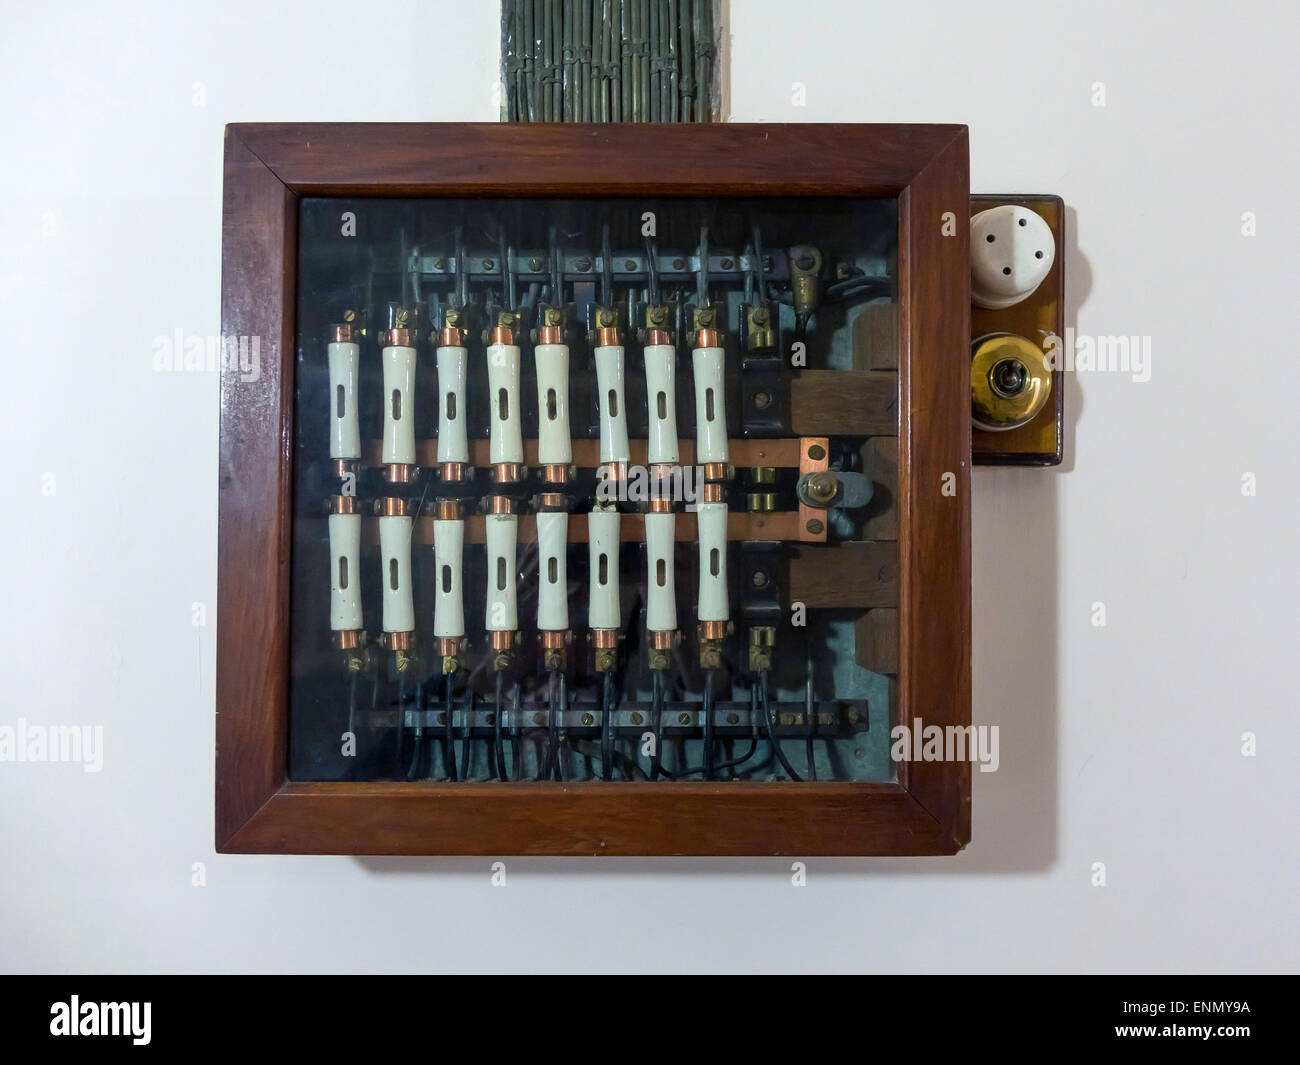 early-20th-century-electrical-fuse-box-wooden-with-a-glass-front-in-ENMY9A.jpg